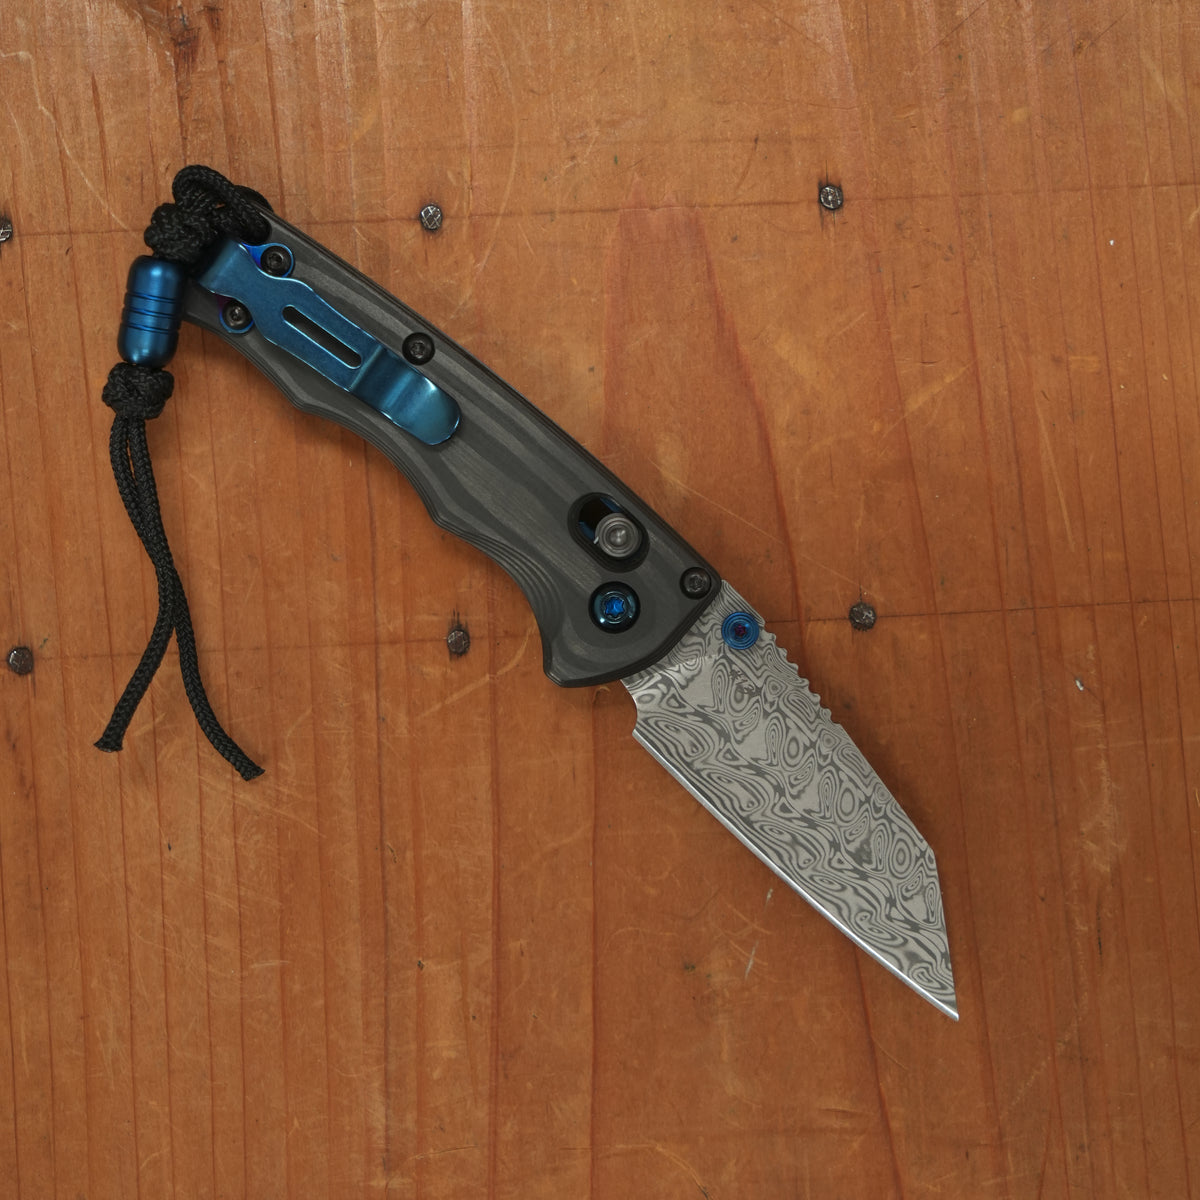 Benchmade Gold Class 290-241 Full Immunity Damasteel Wharncliffe AXIS Lock Unidirectional Carbon Fiber Handle